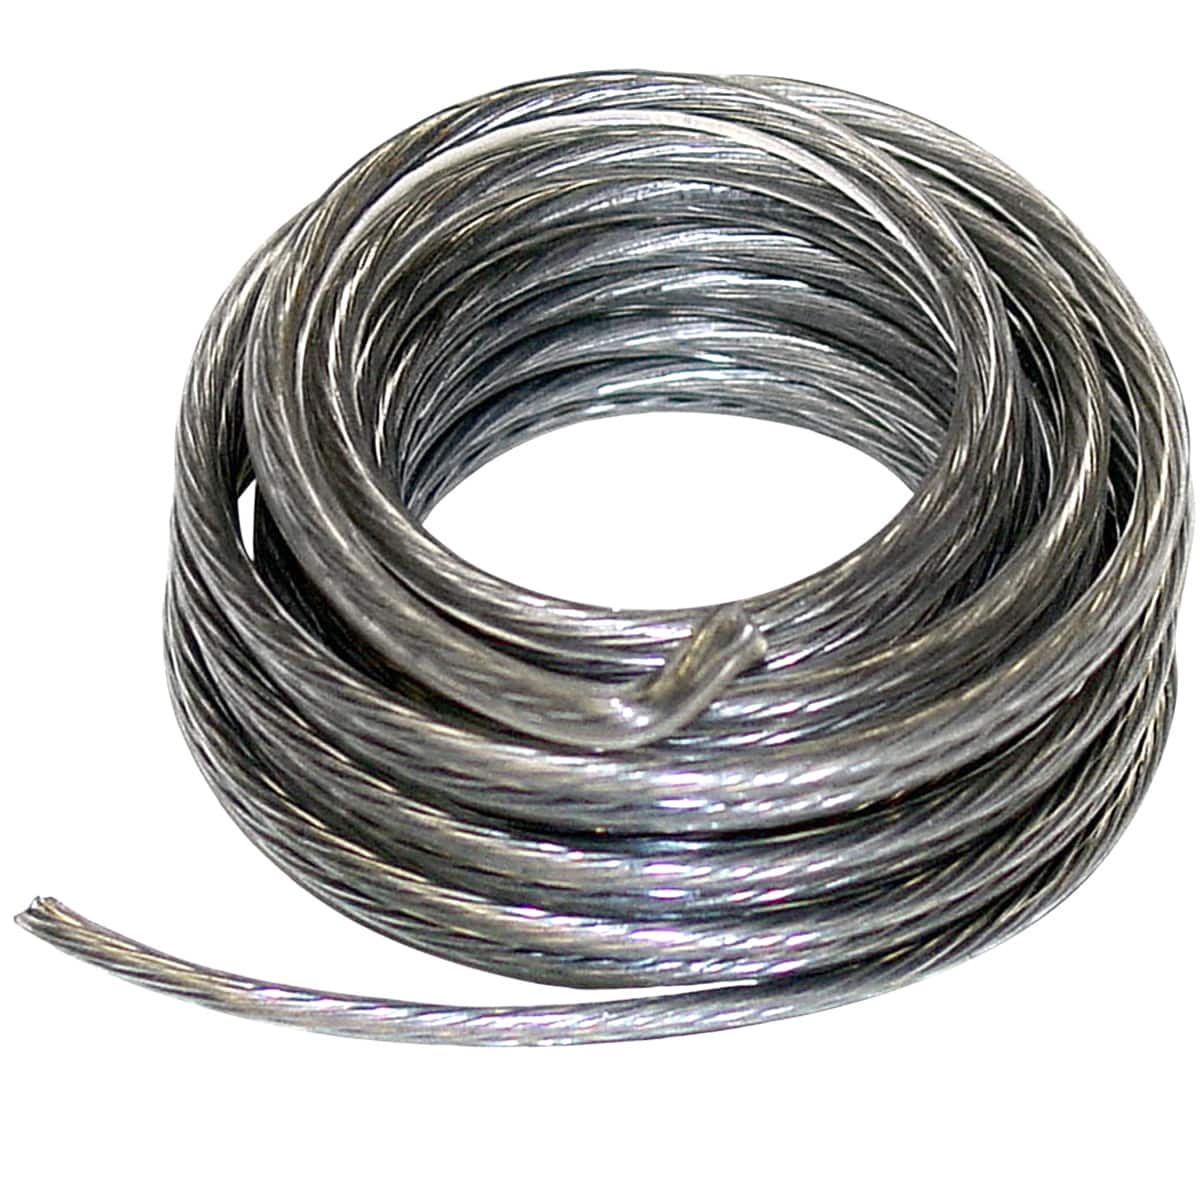 Plastic Coated Picture Wire - Buy Stainless Steel Picture Hanging Wire